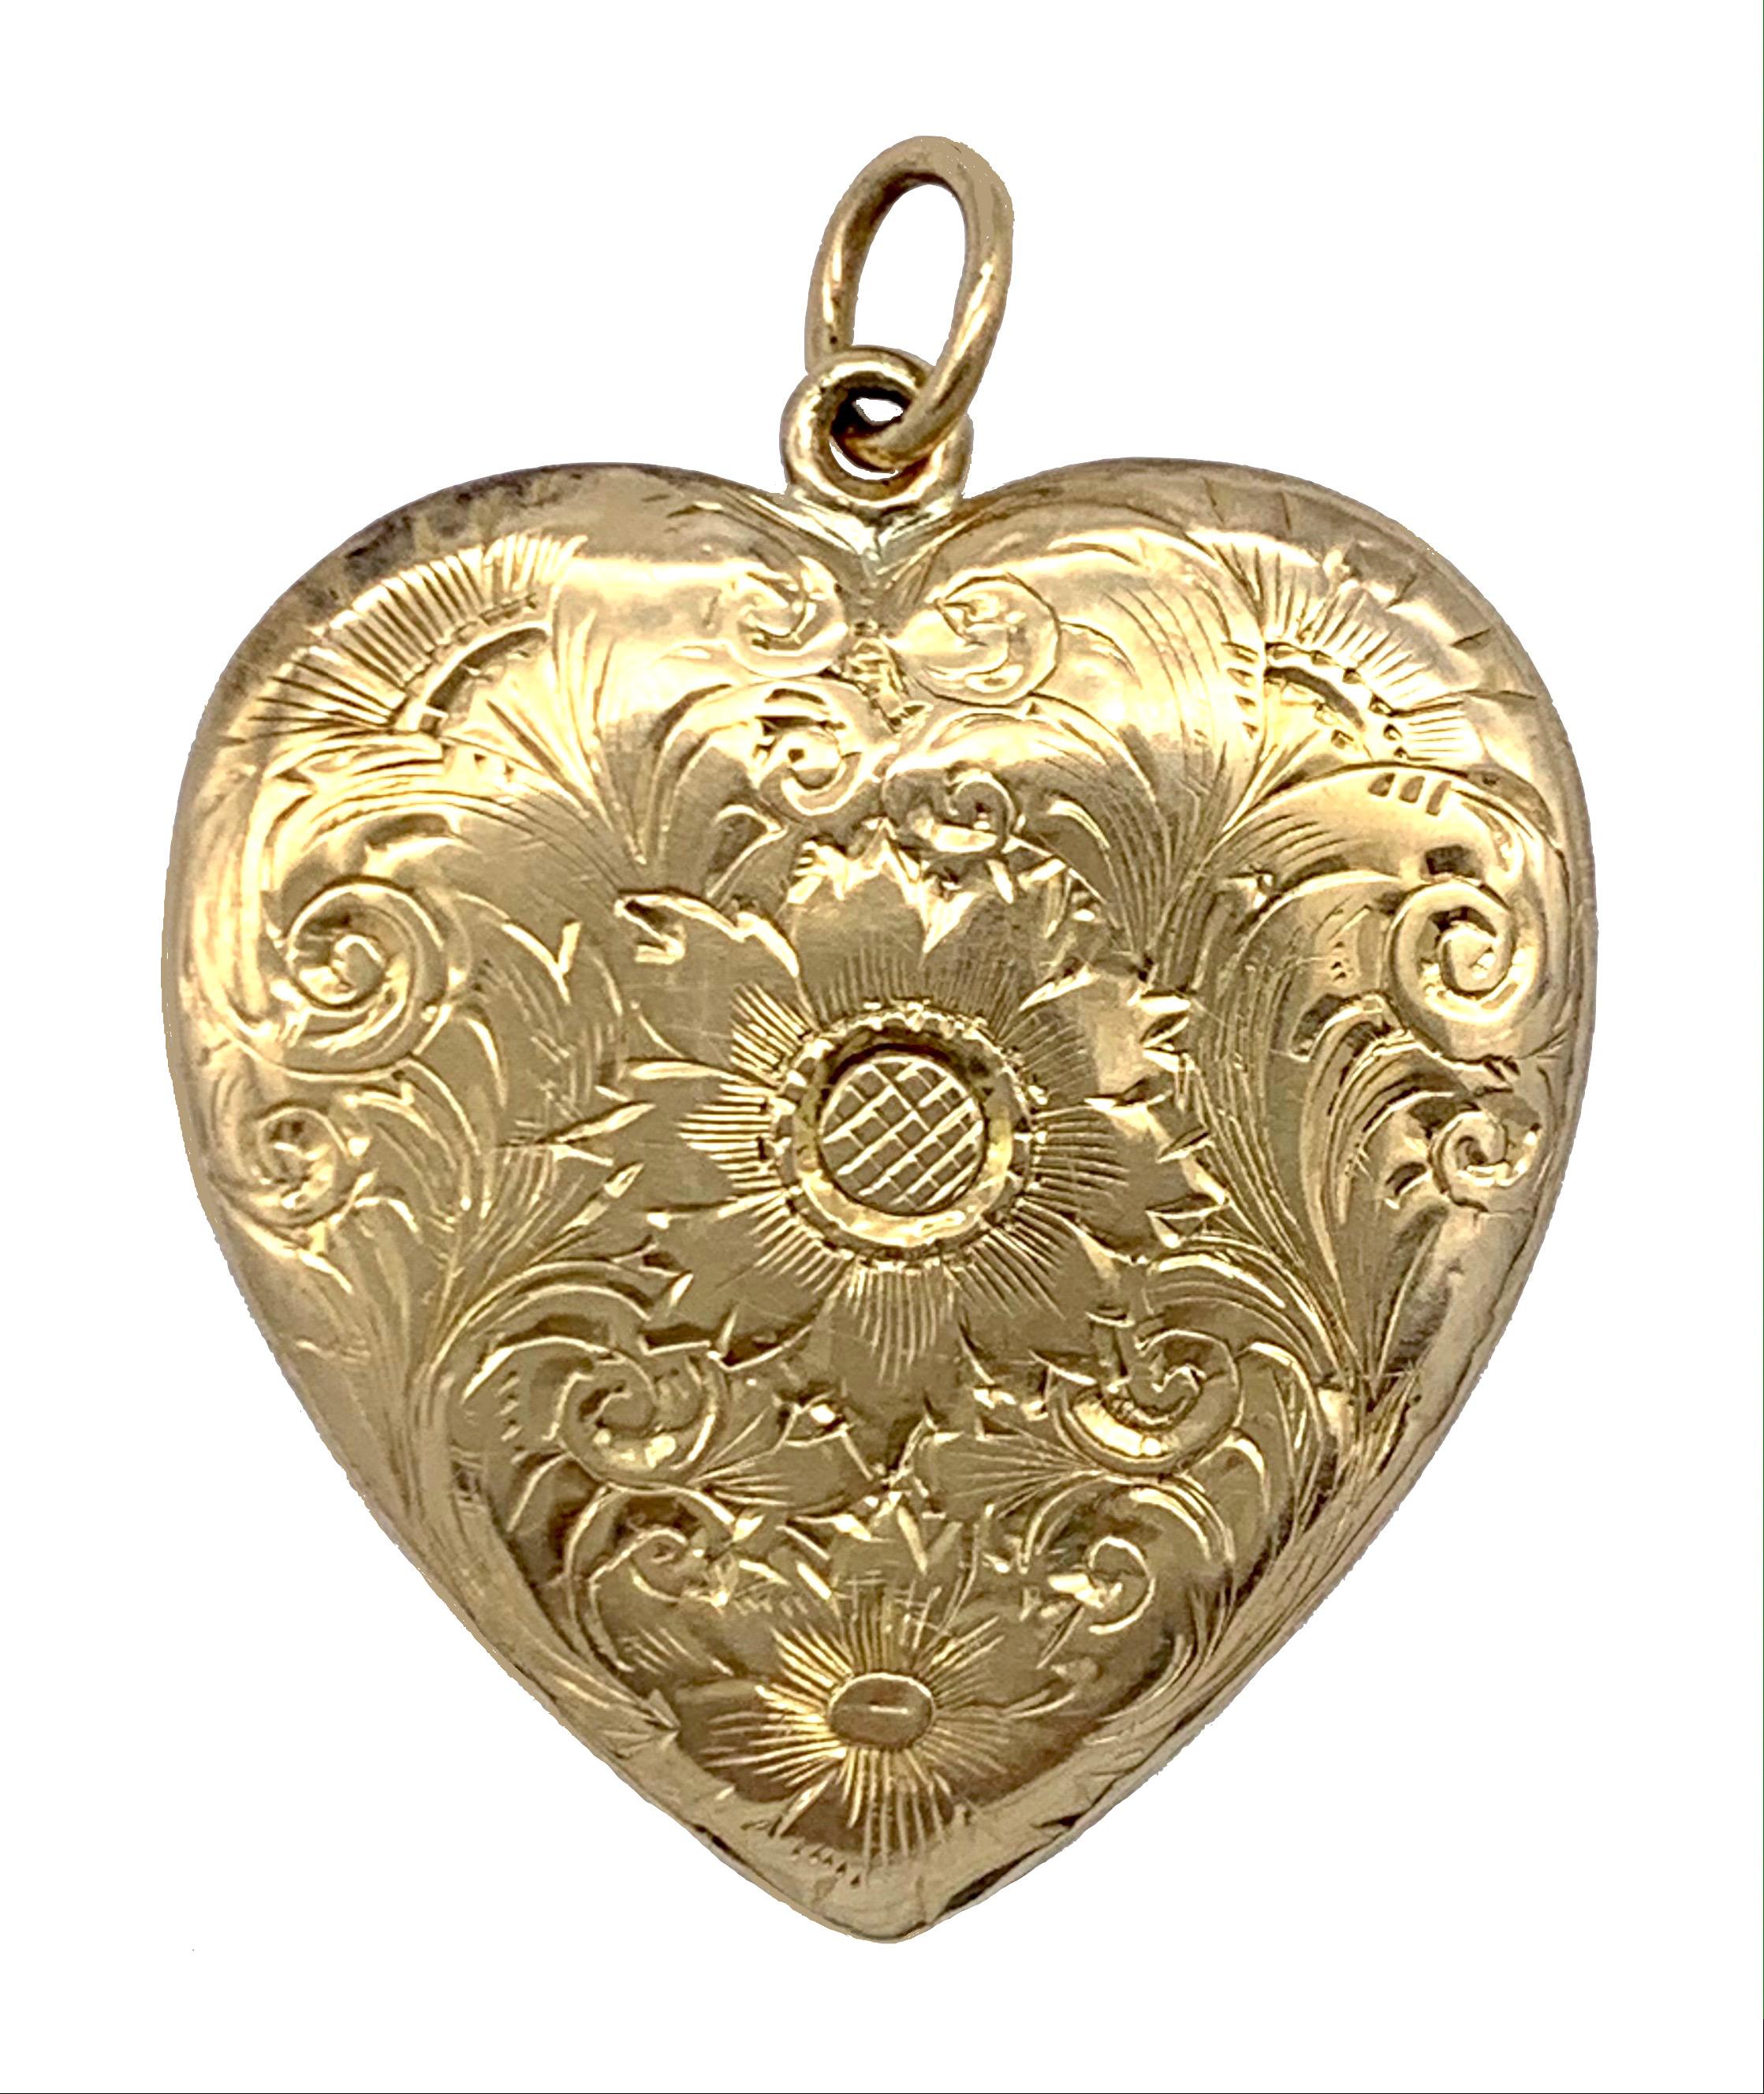 The elegant victorian heart locket is richly engraved with a large and a small flower, maybe a sunflower, thistles and leaves back and front . The flowers are surrounded by beautiful scrollwork covering the entire heart on both sides. Inside, the